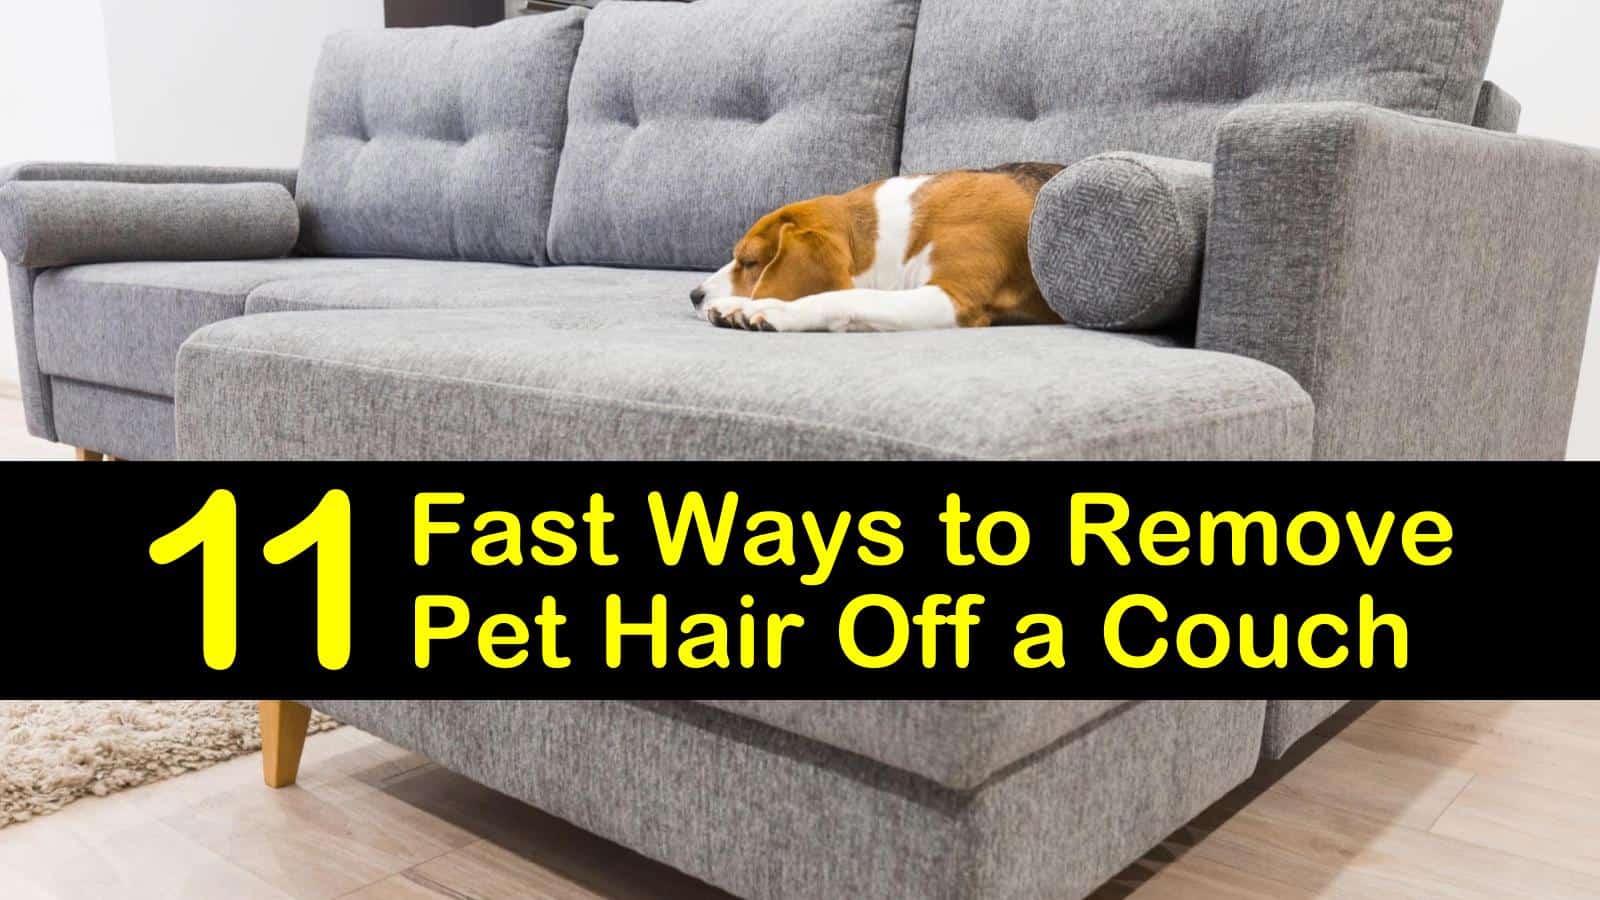 How To Keep Dog Hair Off Couch Off Couch Dog Keep Dogs When